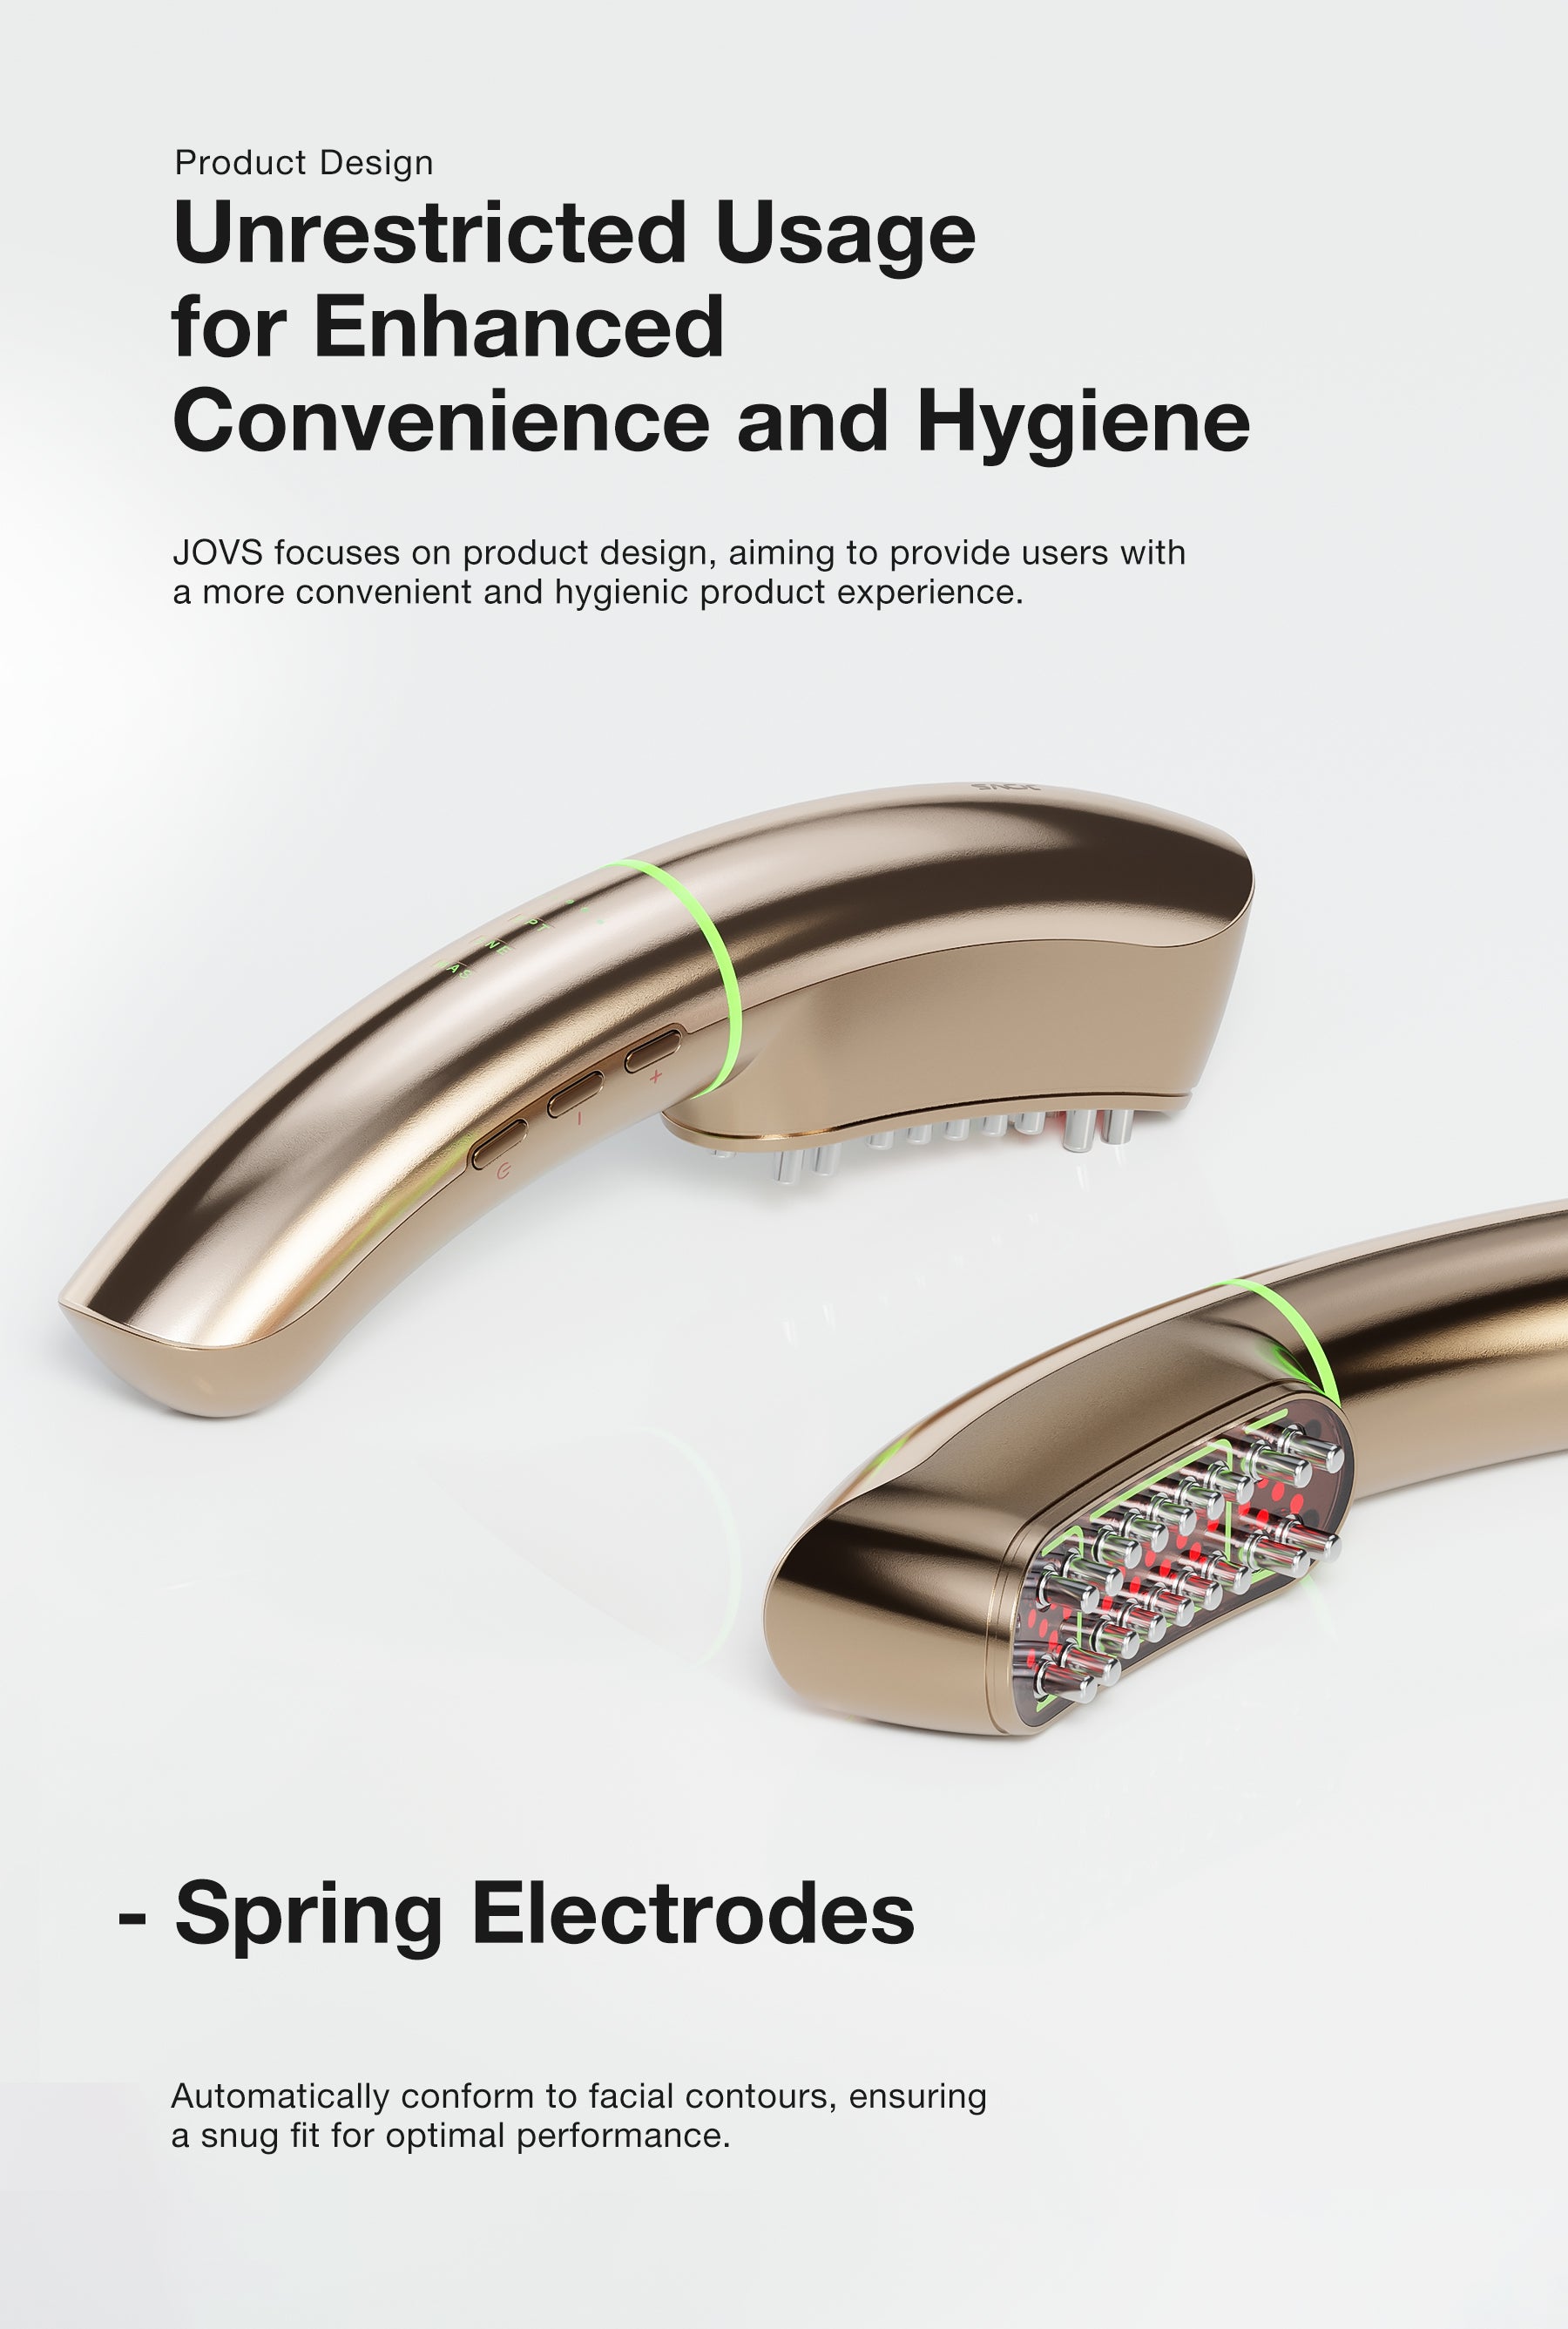 JOVS Slimax Microcurrent Full-body Anti-aging Device with spring electrodes for facial contouring.